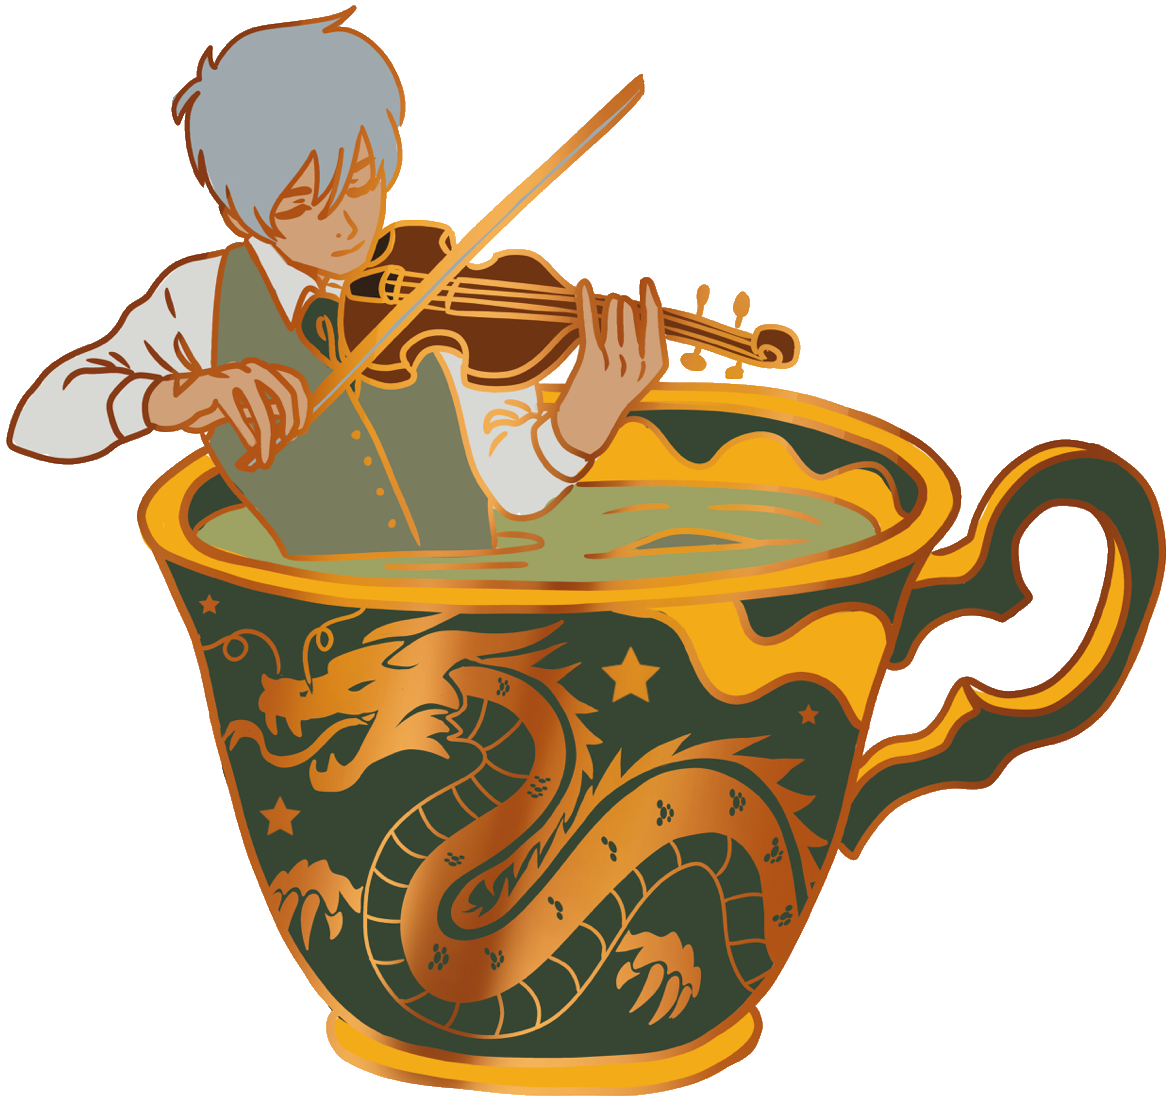 Enchanted Sips Jem Carstairs The Infernal Devices 3 Inch Enamel Pin Shadowhunters Teacups Reader Gift For Book Lover Book Boyfriend